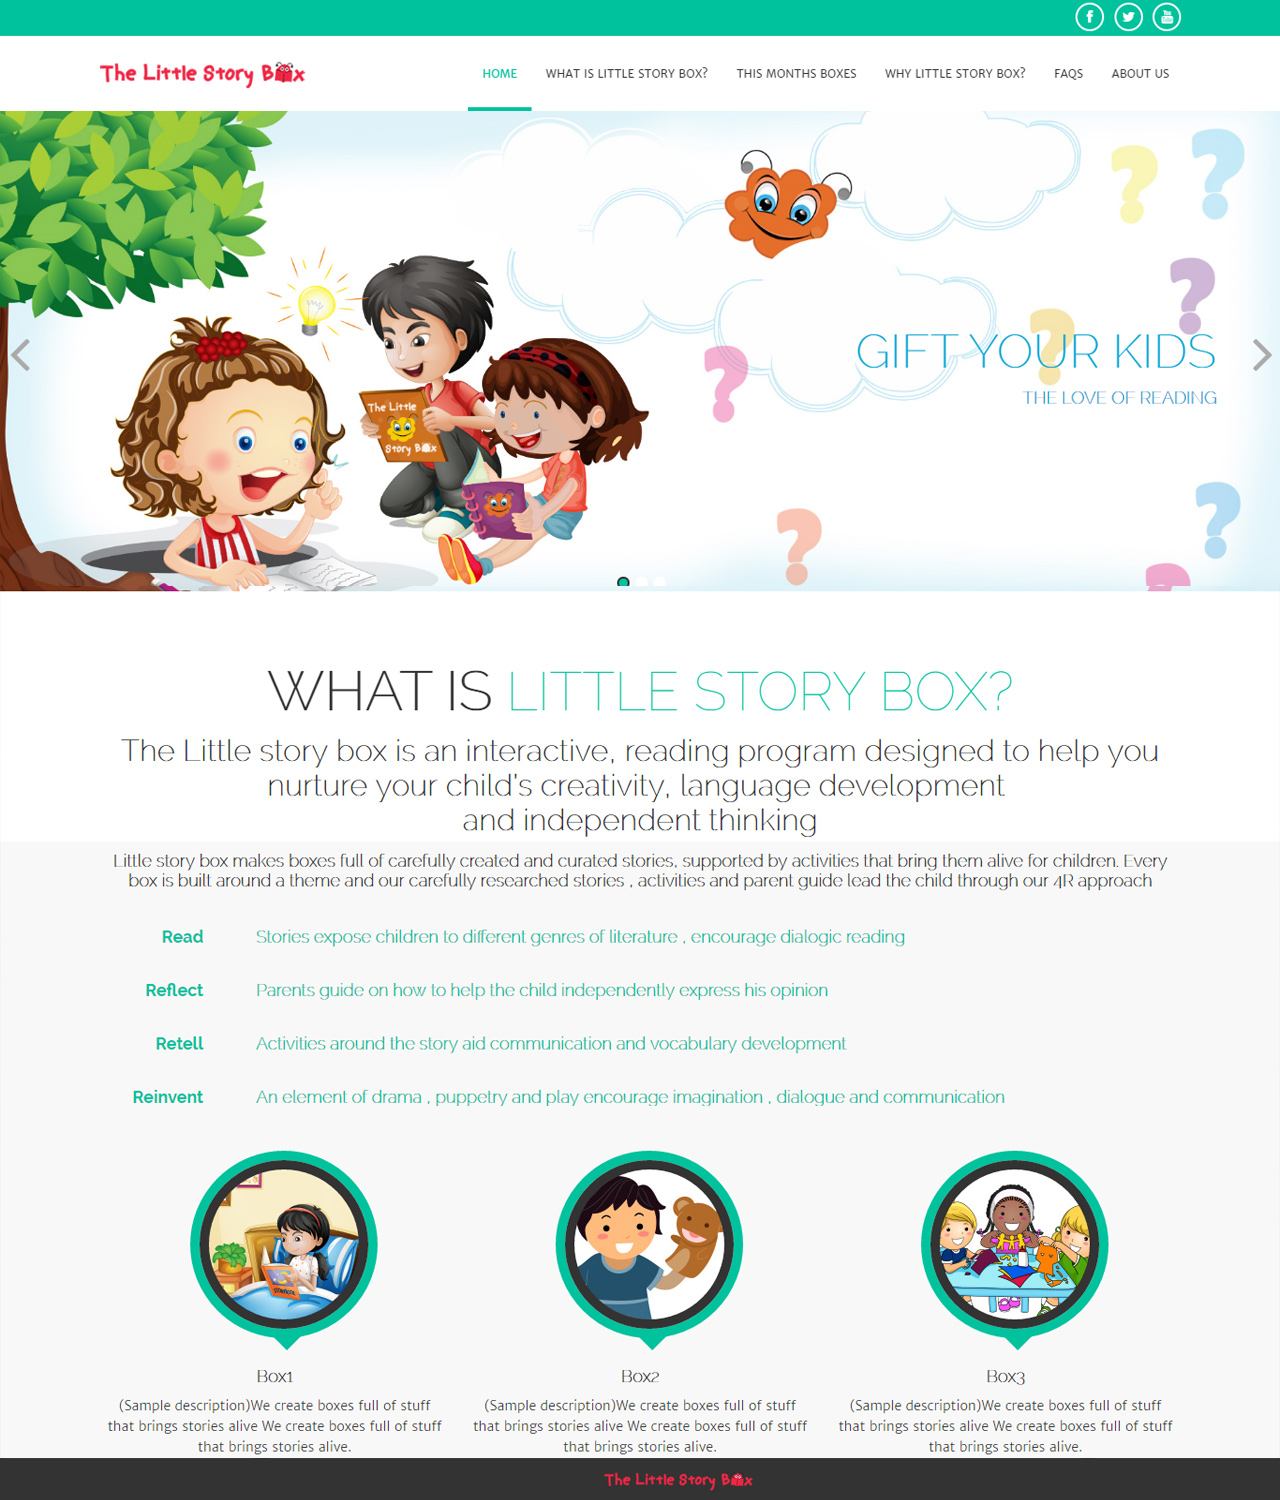 The Little story box is an interactive, reading program for kids